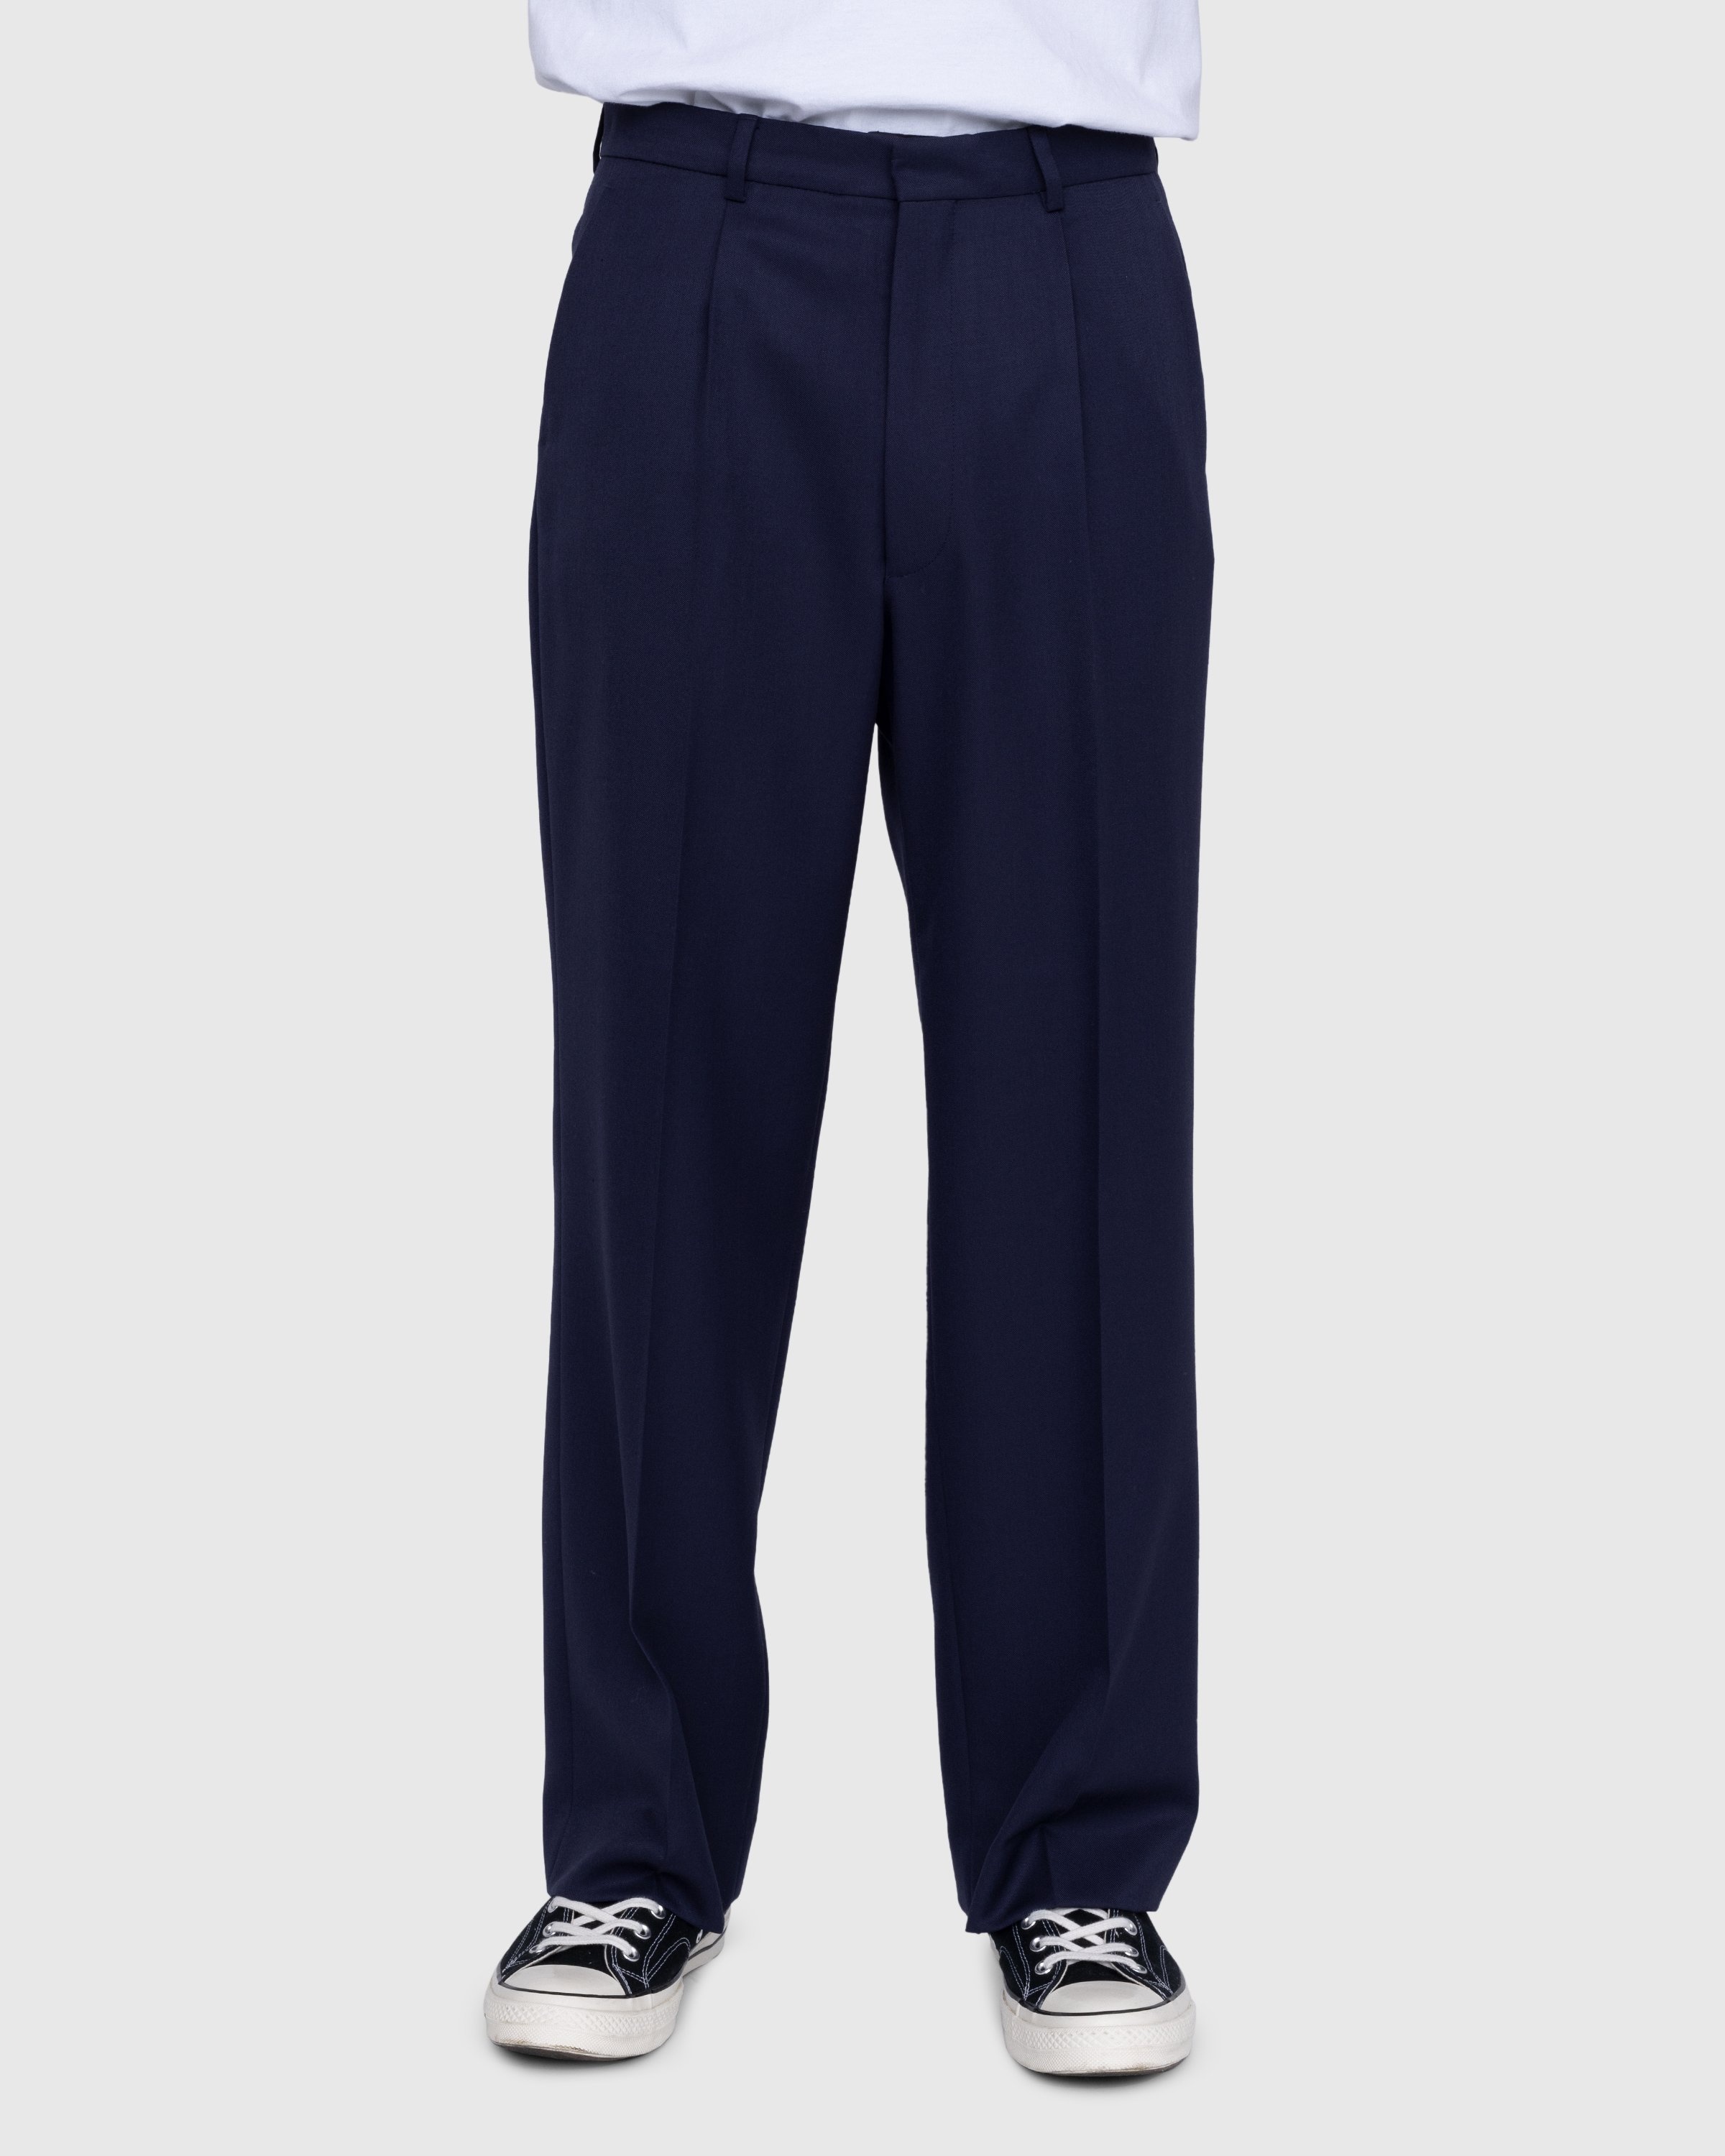 Highsnobiety – Wool Dress Pant Navy - Trousers - Blue - Image 2